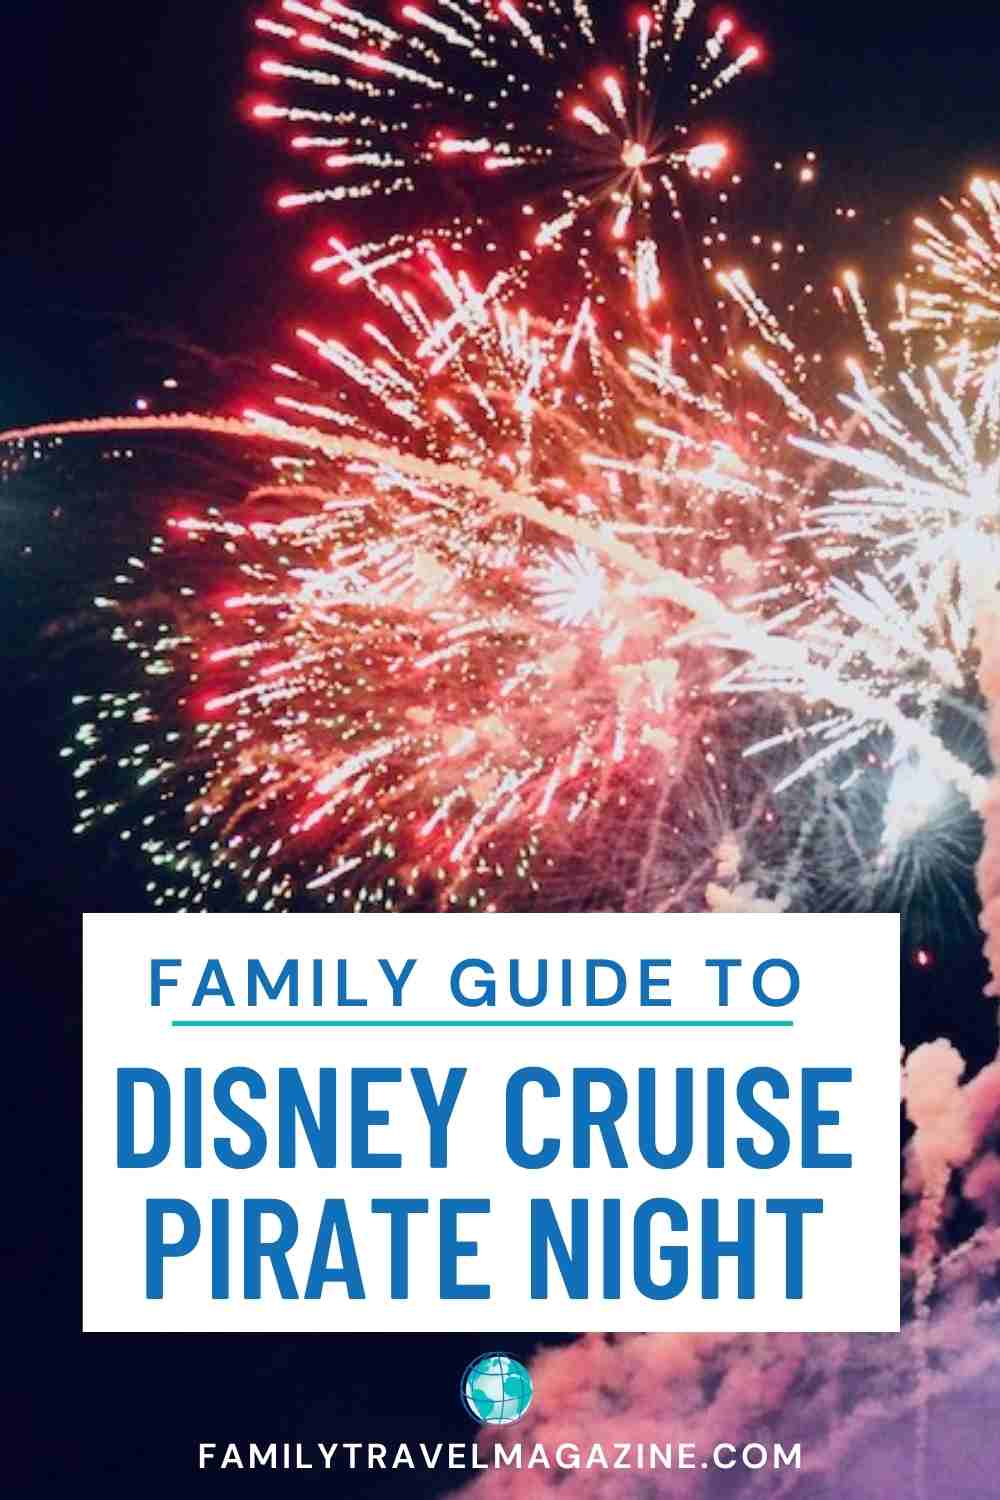 Disney Cruise Pirate Night Guide: Our Top Tips And Everything You